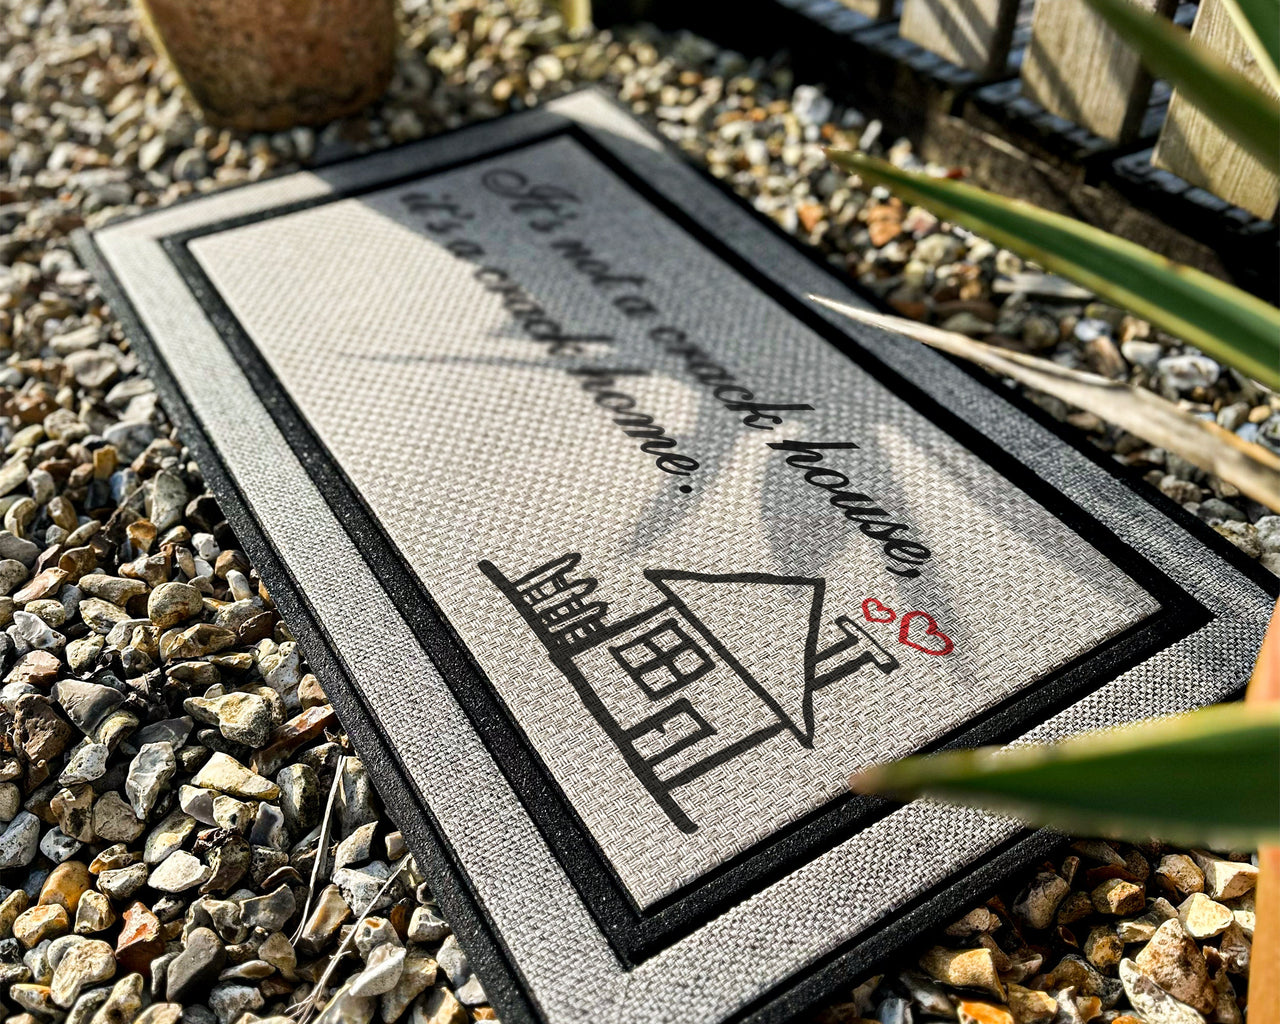 Welcome Home Doormat - It's Not a Crack House, it's a Crack Home